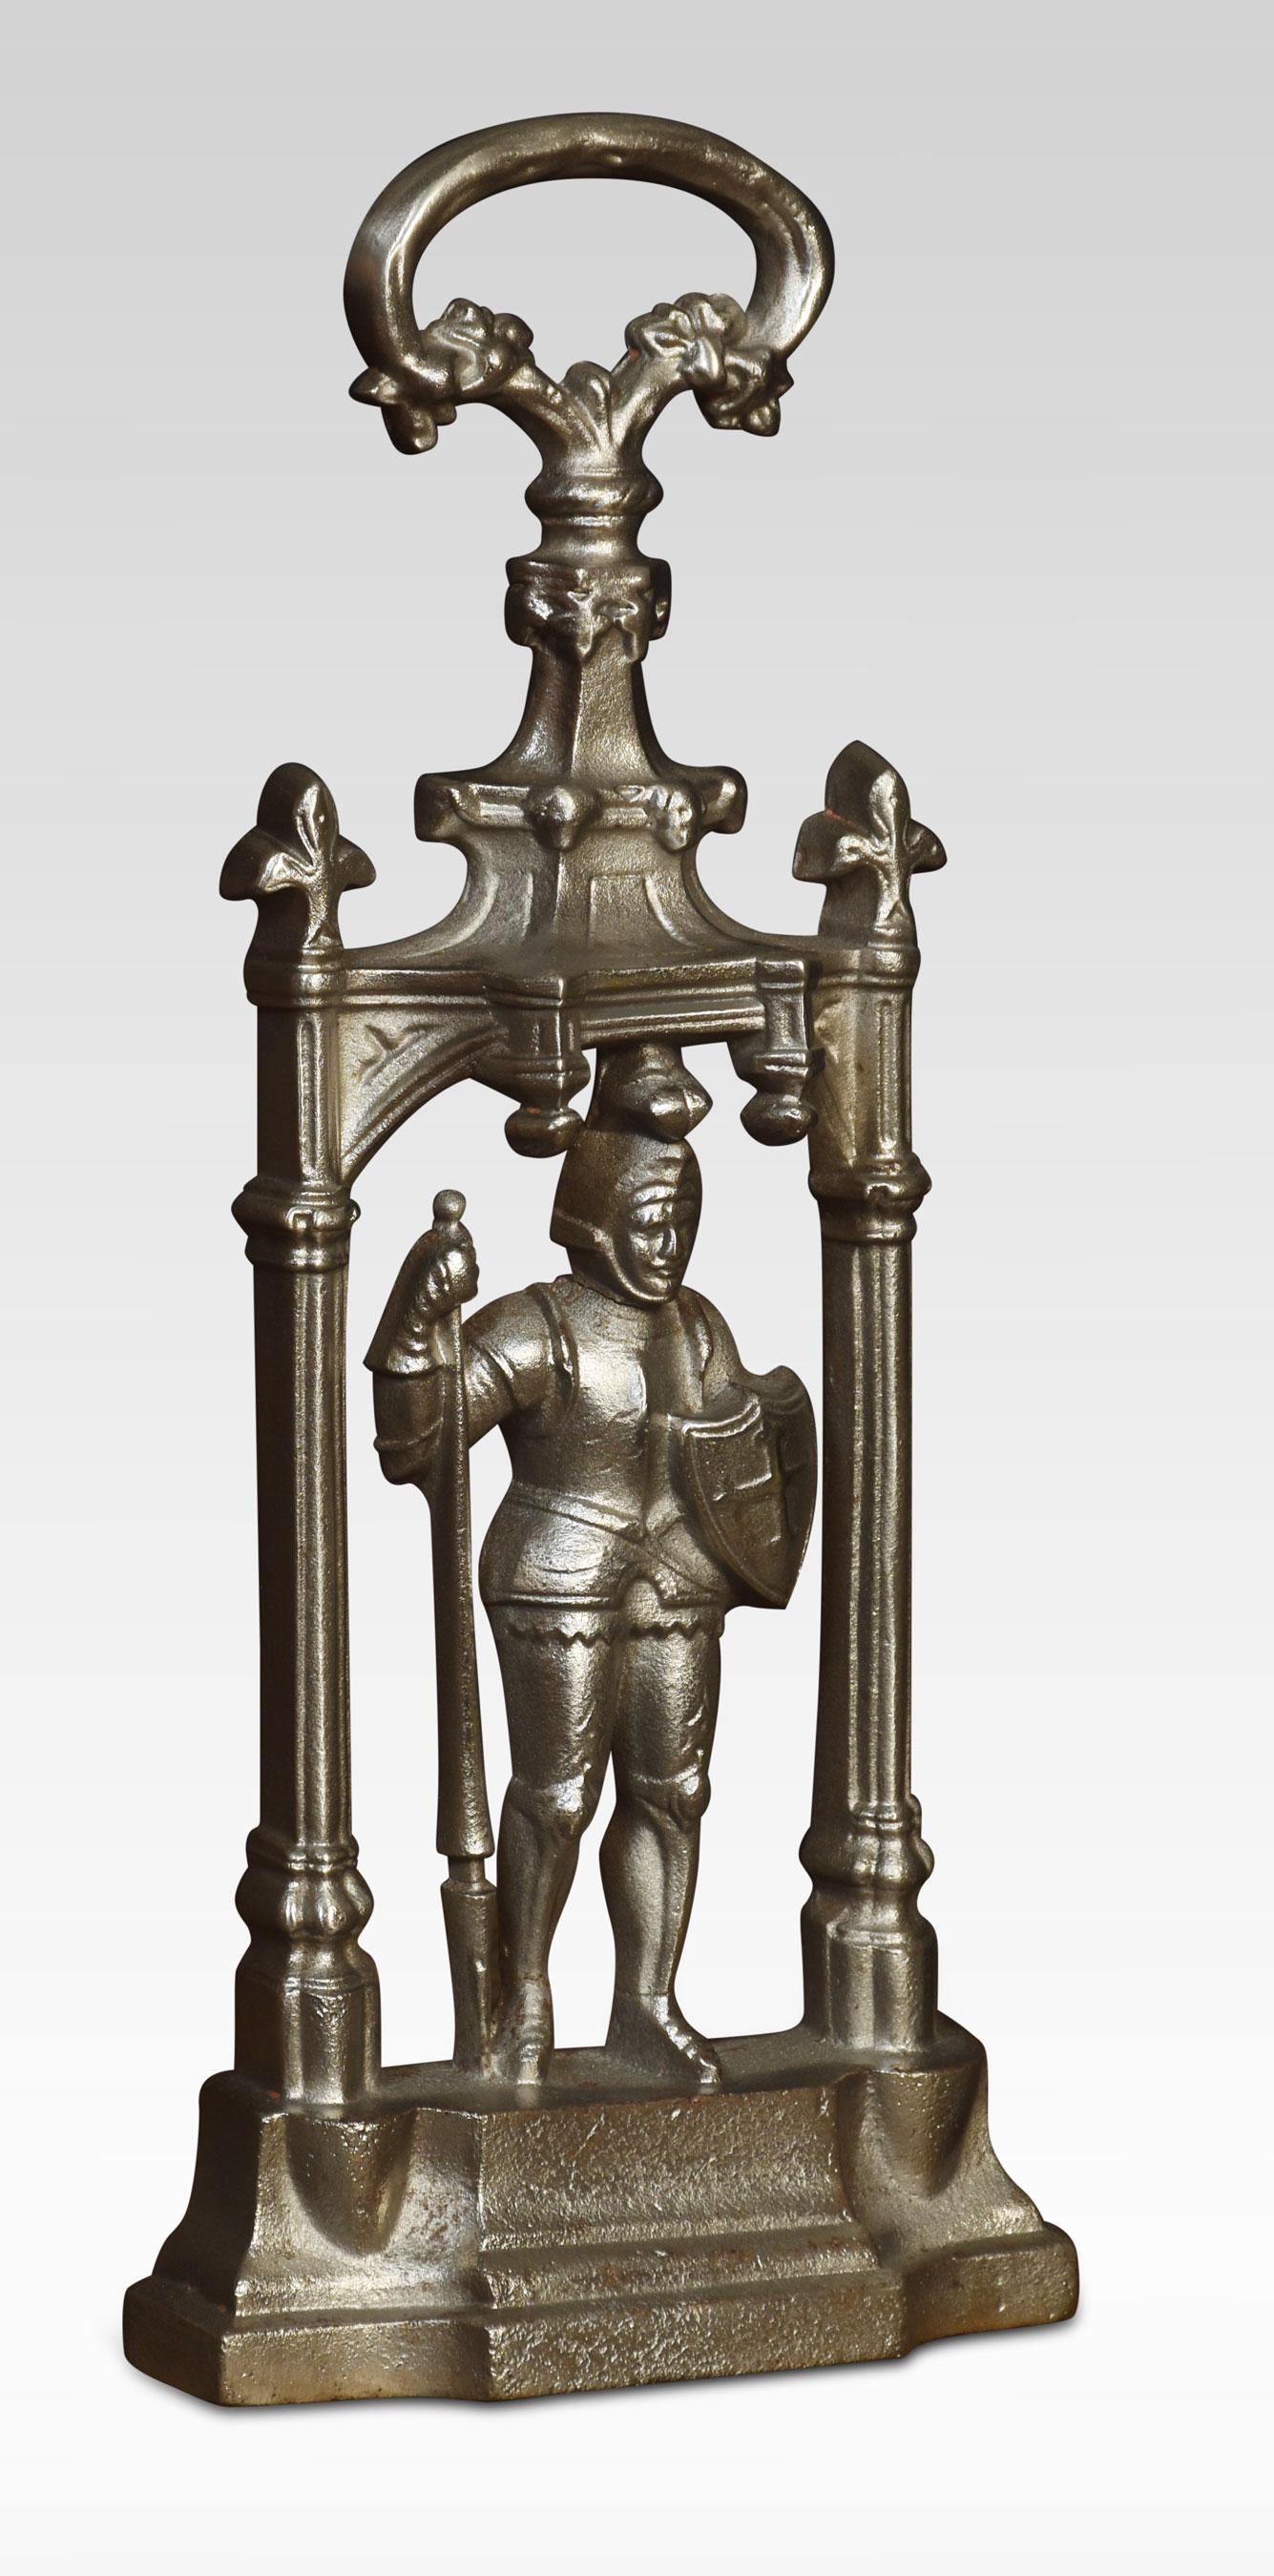 Pair of 19th century cast iron door stops with shaped handles above a figural soldier raised up on a shaped base.
Dimensions
Height 17 Inches
Width 7.5 Inches
Depth 3 Inches.